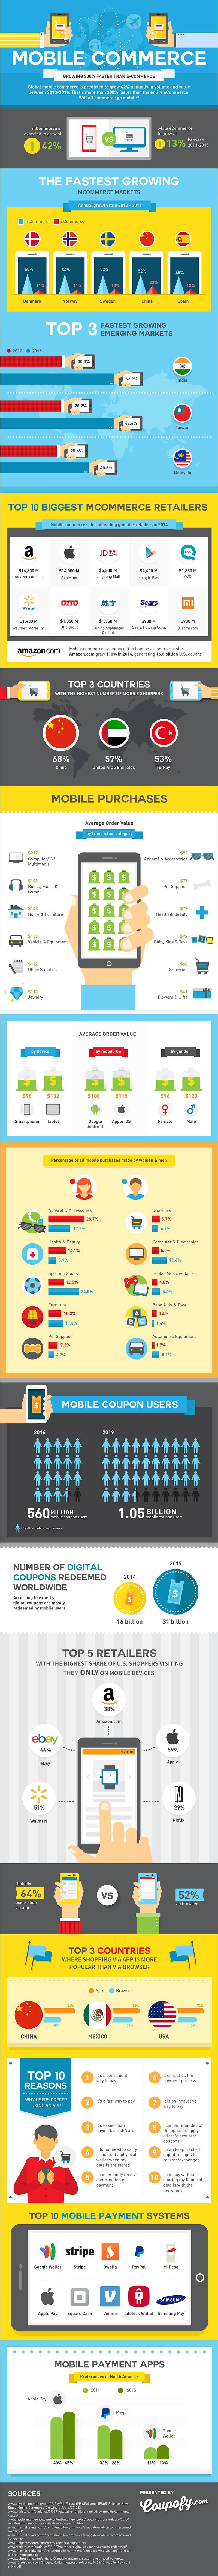 Mobile Commerce Growing 300% Faster Than Ecommerce